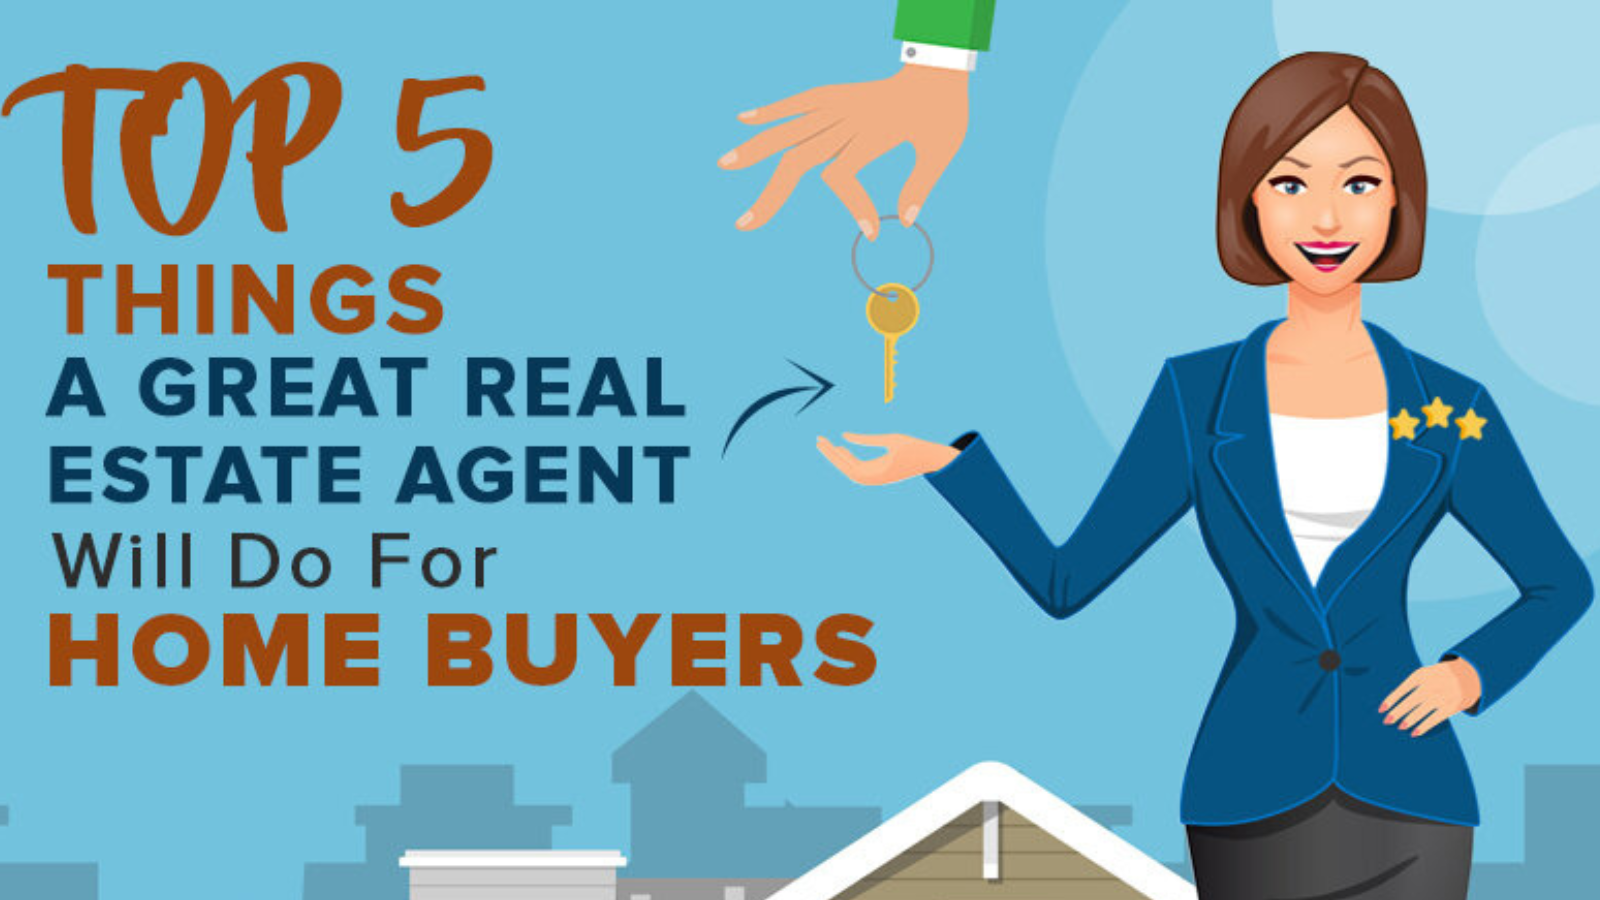 Top 5 Things A Great Real Estate Agent Will Do For Home Buyers